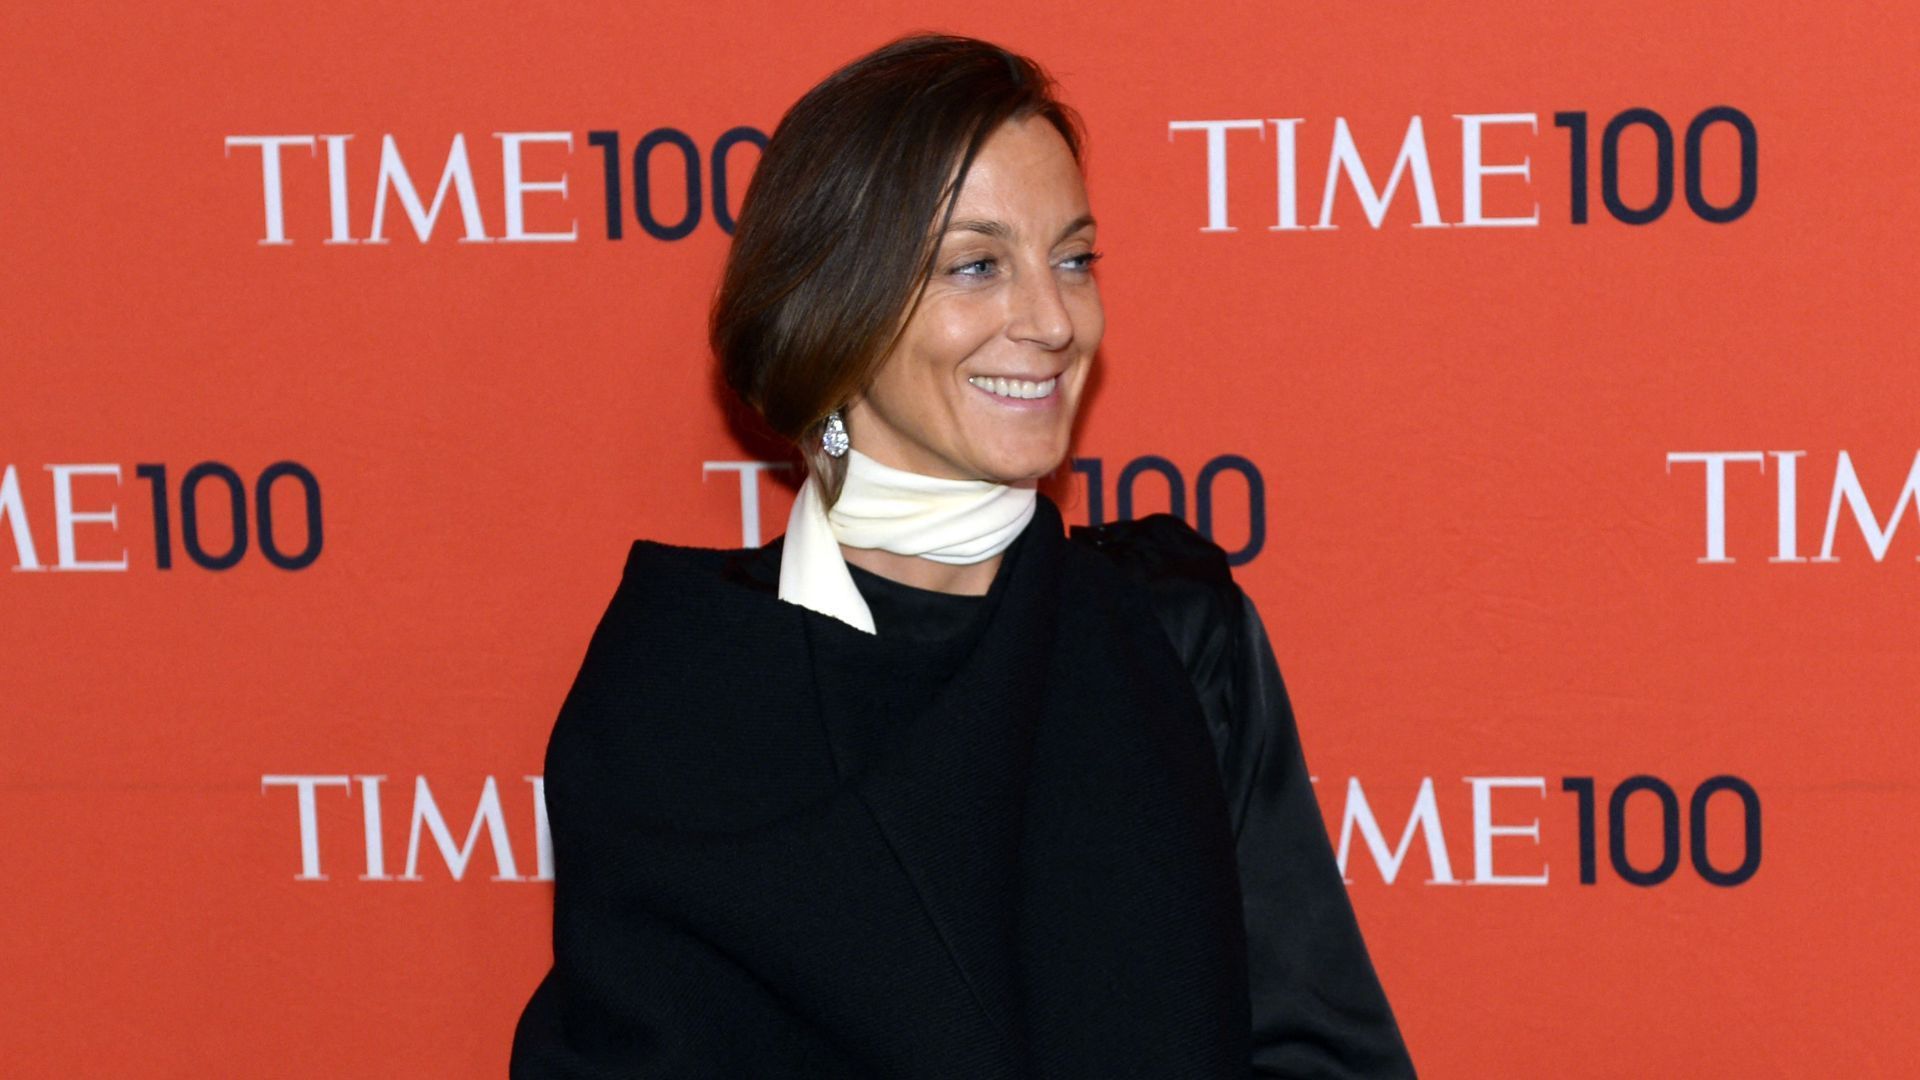 The Phoebe Philo Fashion Capsule to Wear Before Her Return in 2022